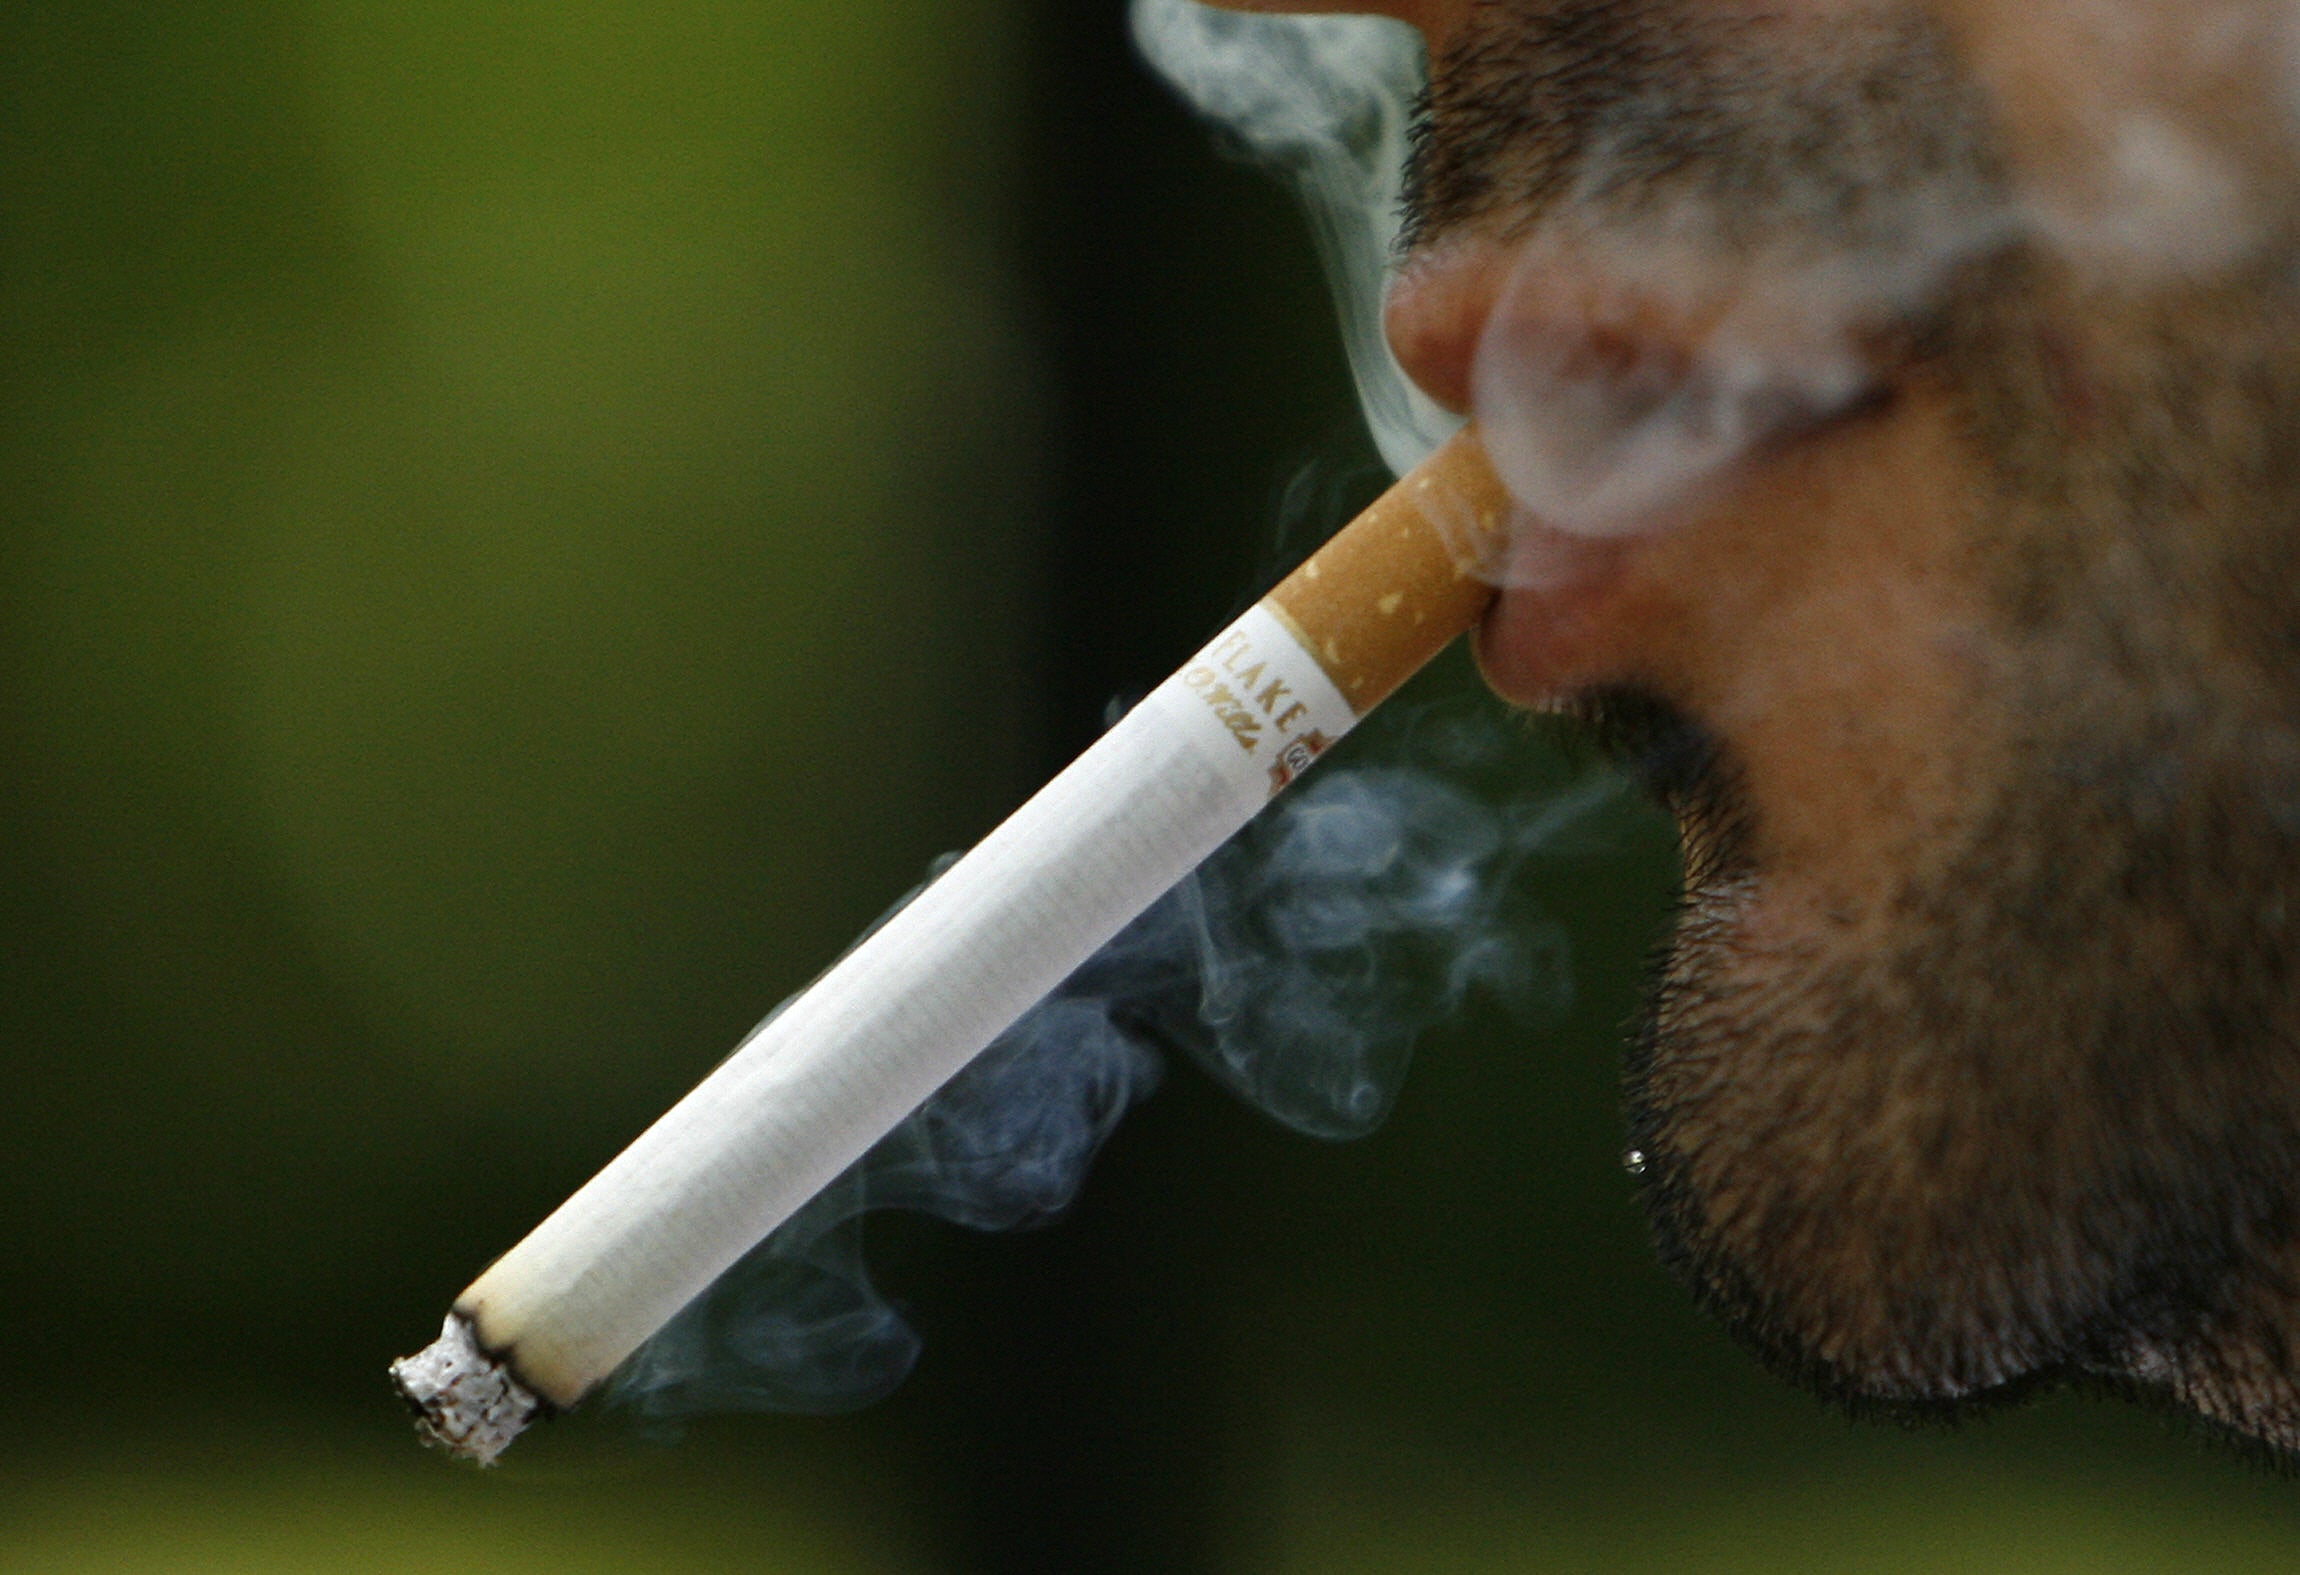 Smoking rates have dropped sharply in the UK in the last few decades